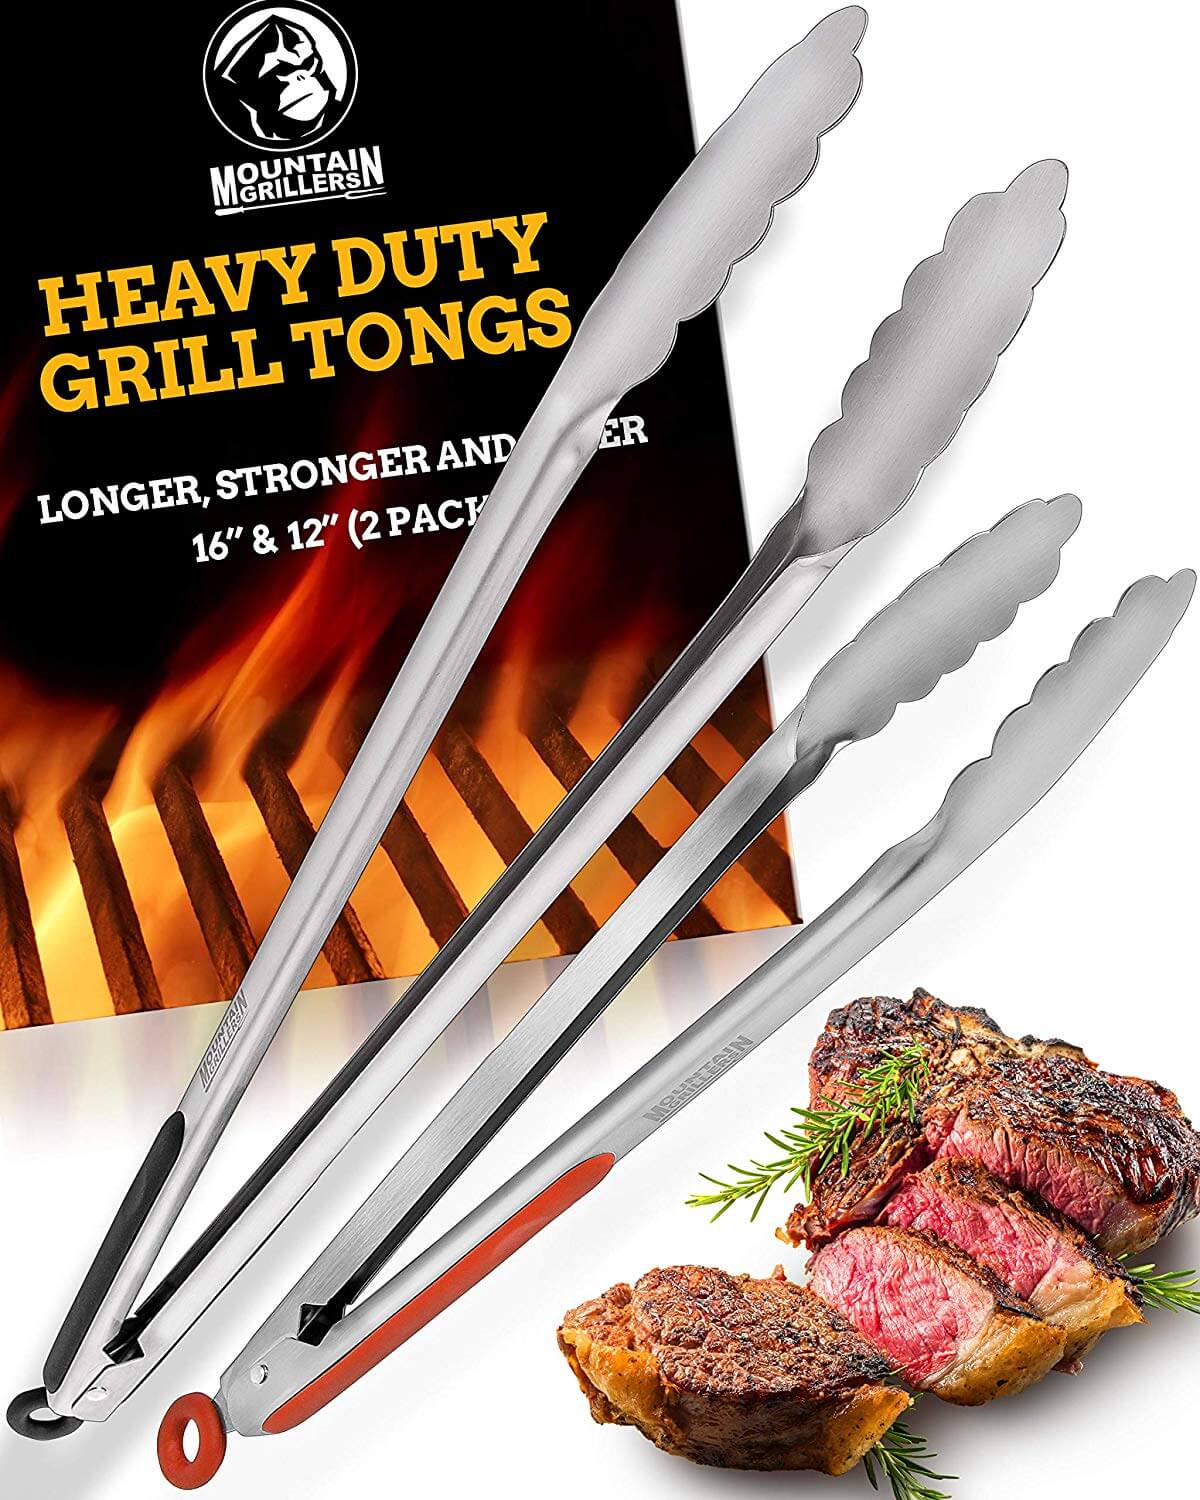 Mountain Grillers Grill Tongs